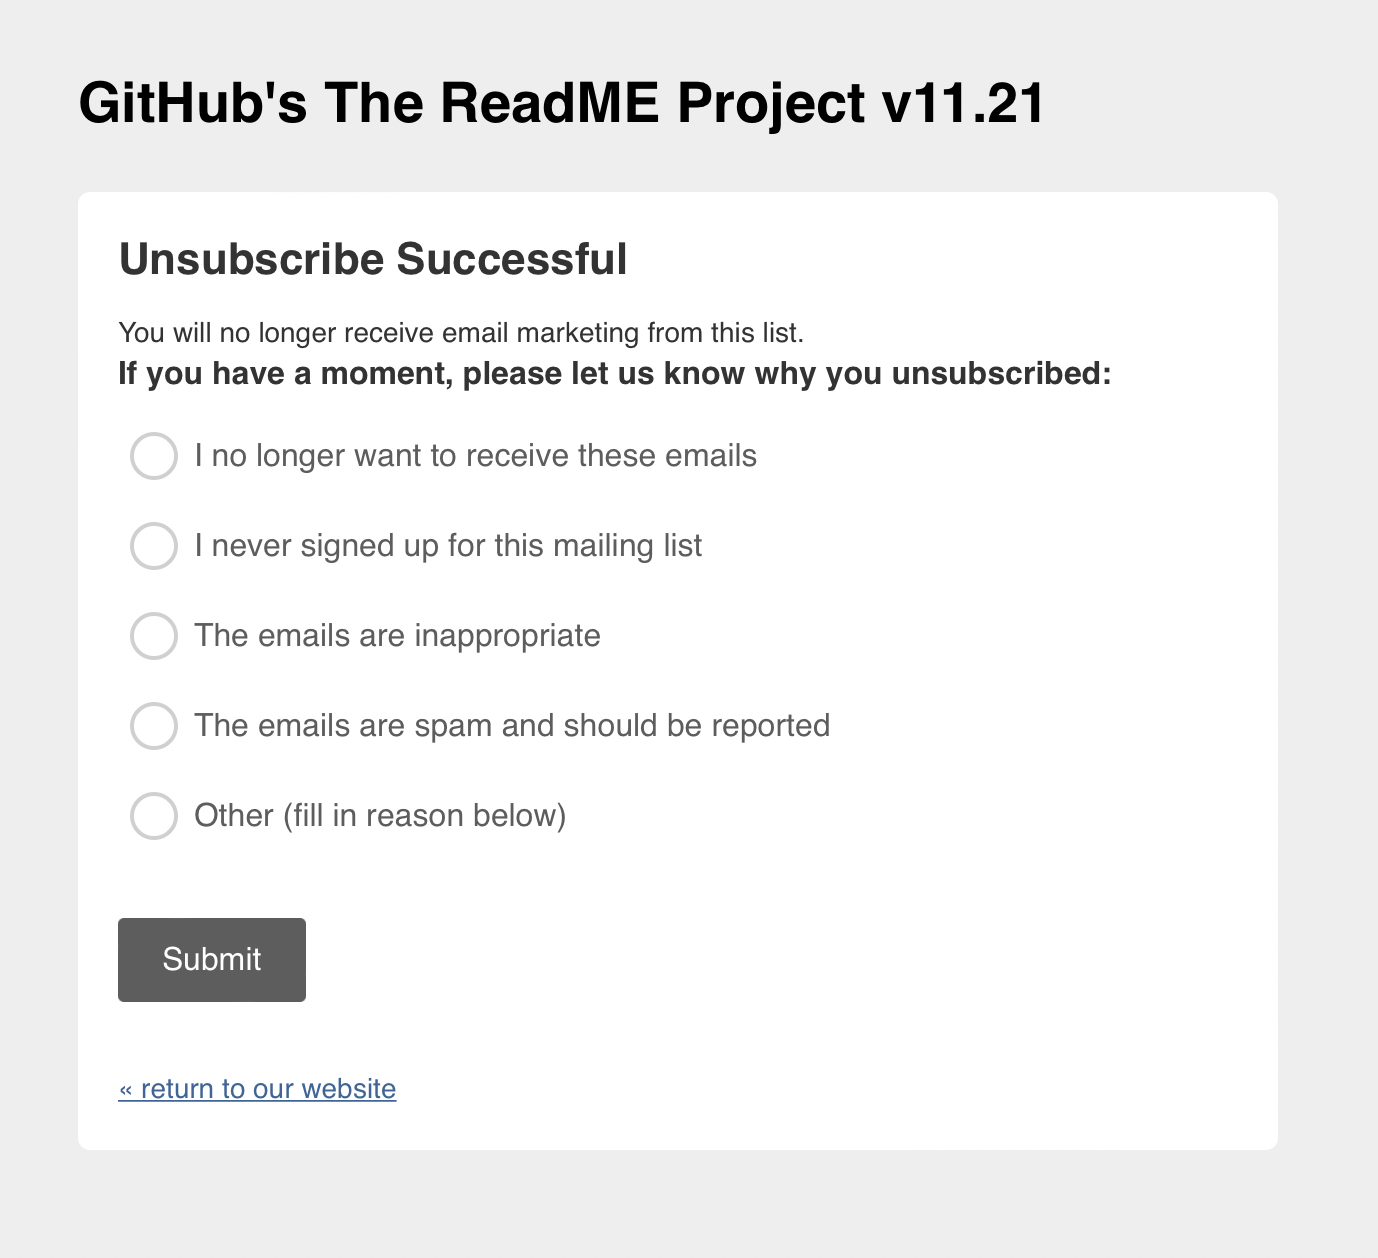 I have unsubscribed from the "GitHub's The ReadME Project v11.21" list"